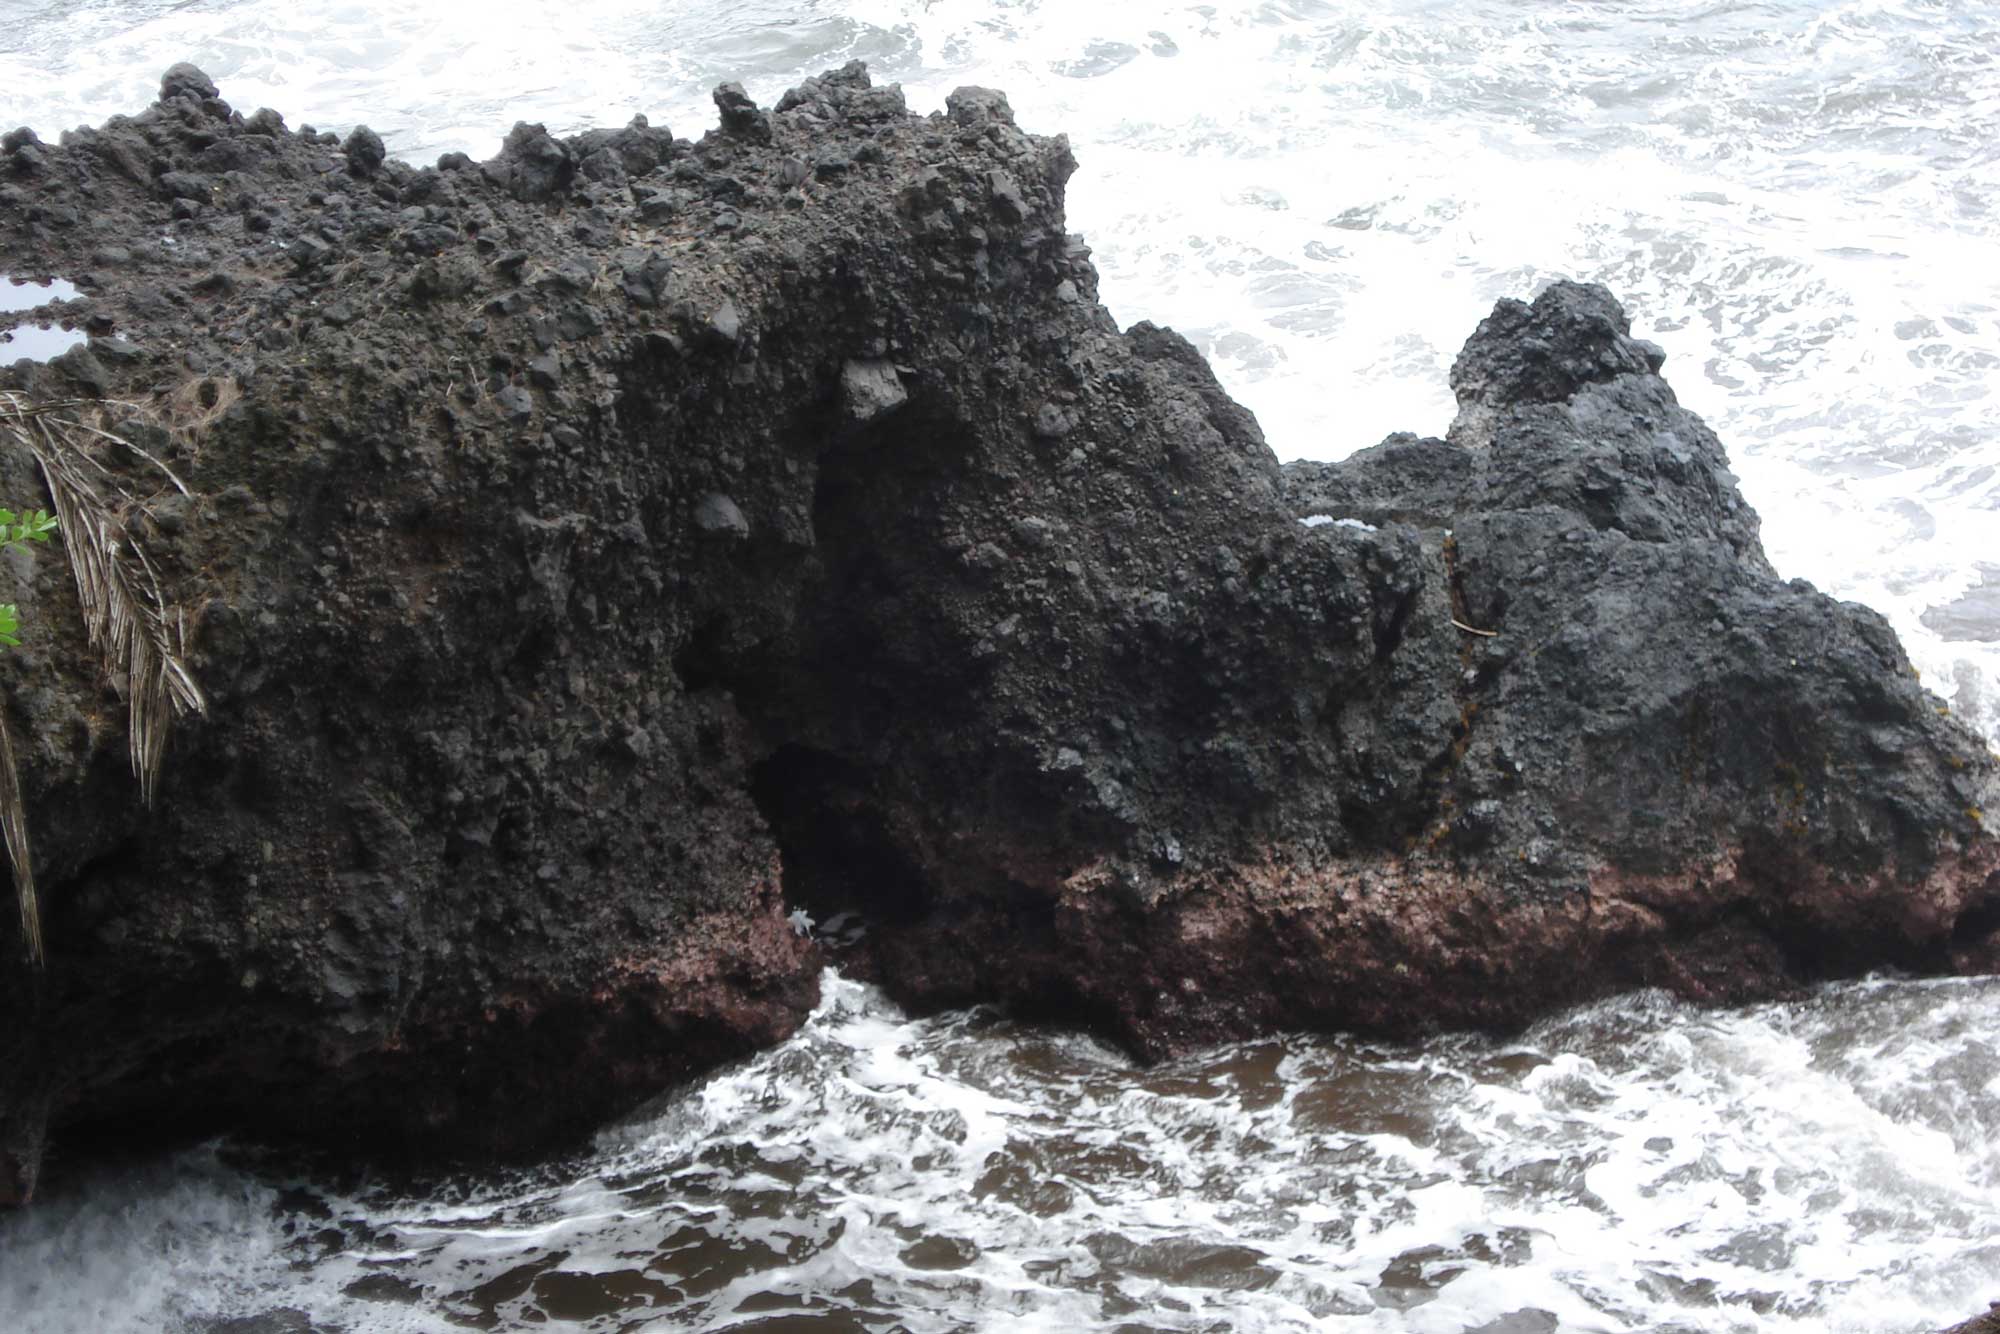 Photograph of a conglomerate composed of basalt cobbles on the Big Island of Hawaii.